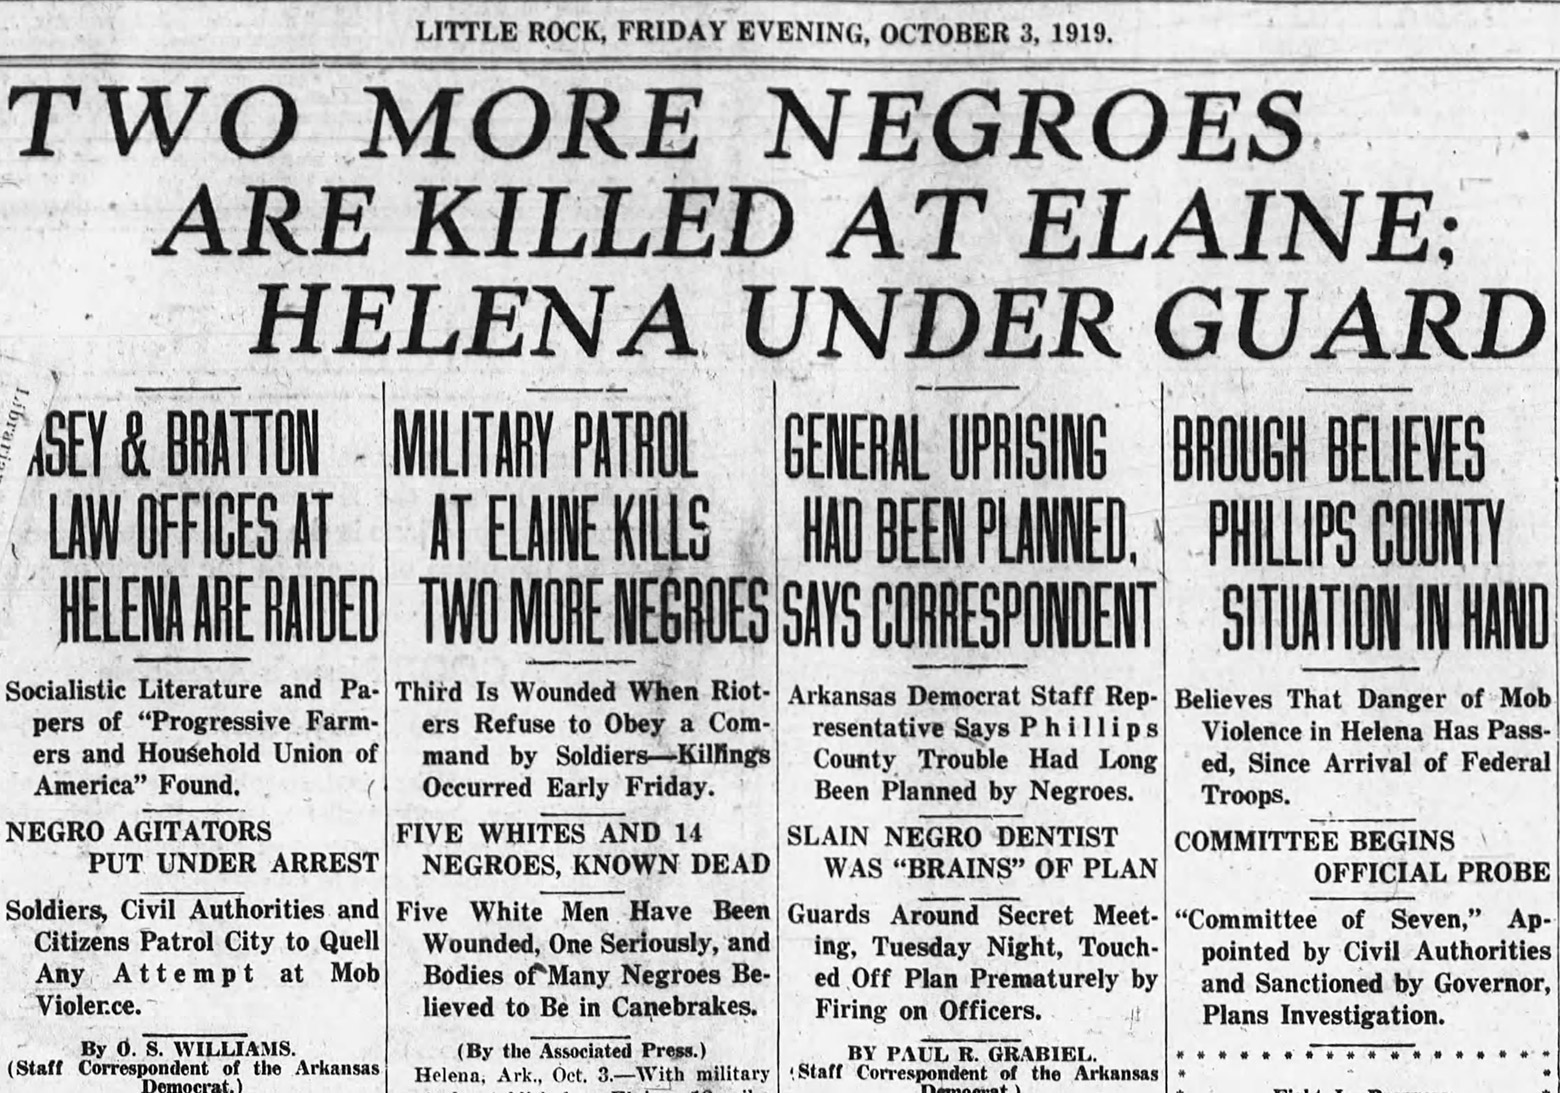 "Two more Negroes are killed at Elaine Helena under guard" newspaper clipping